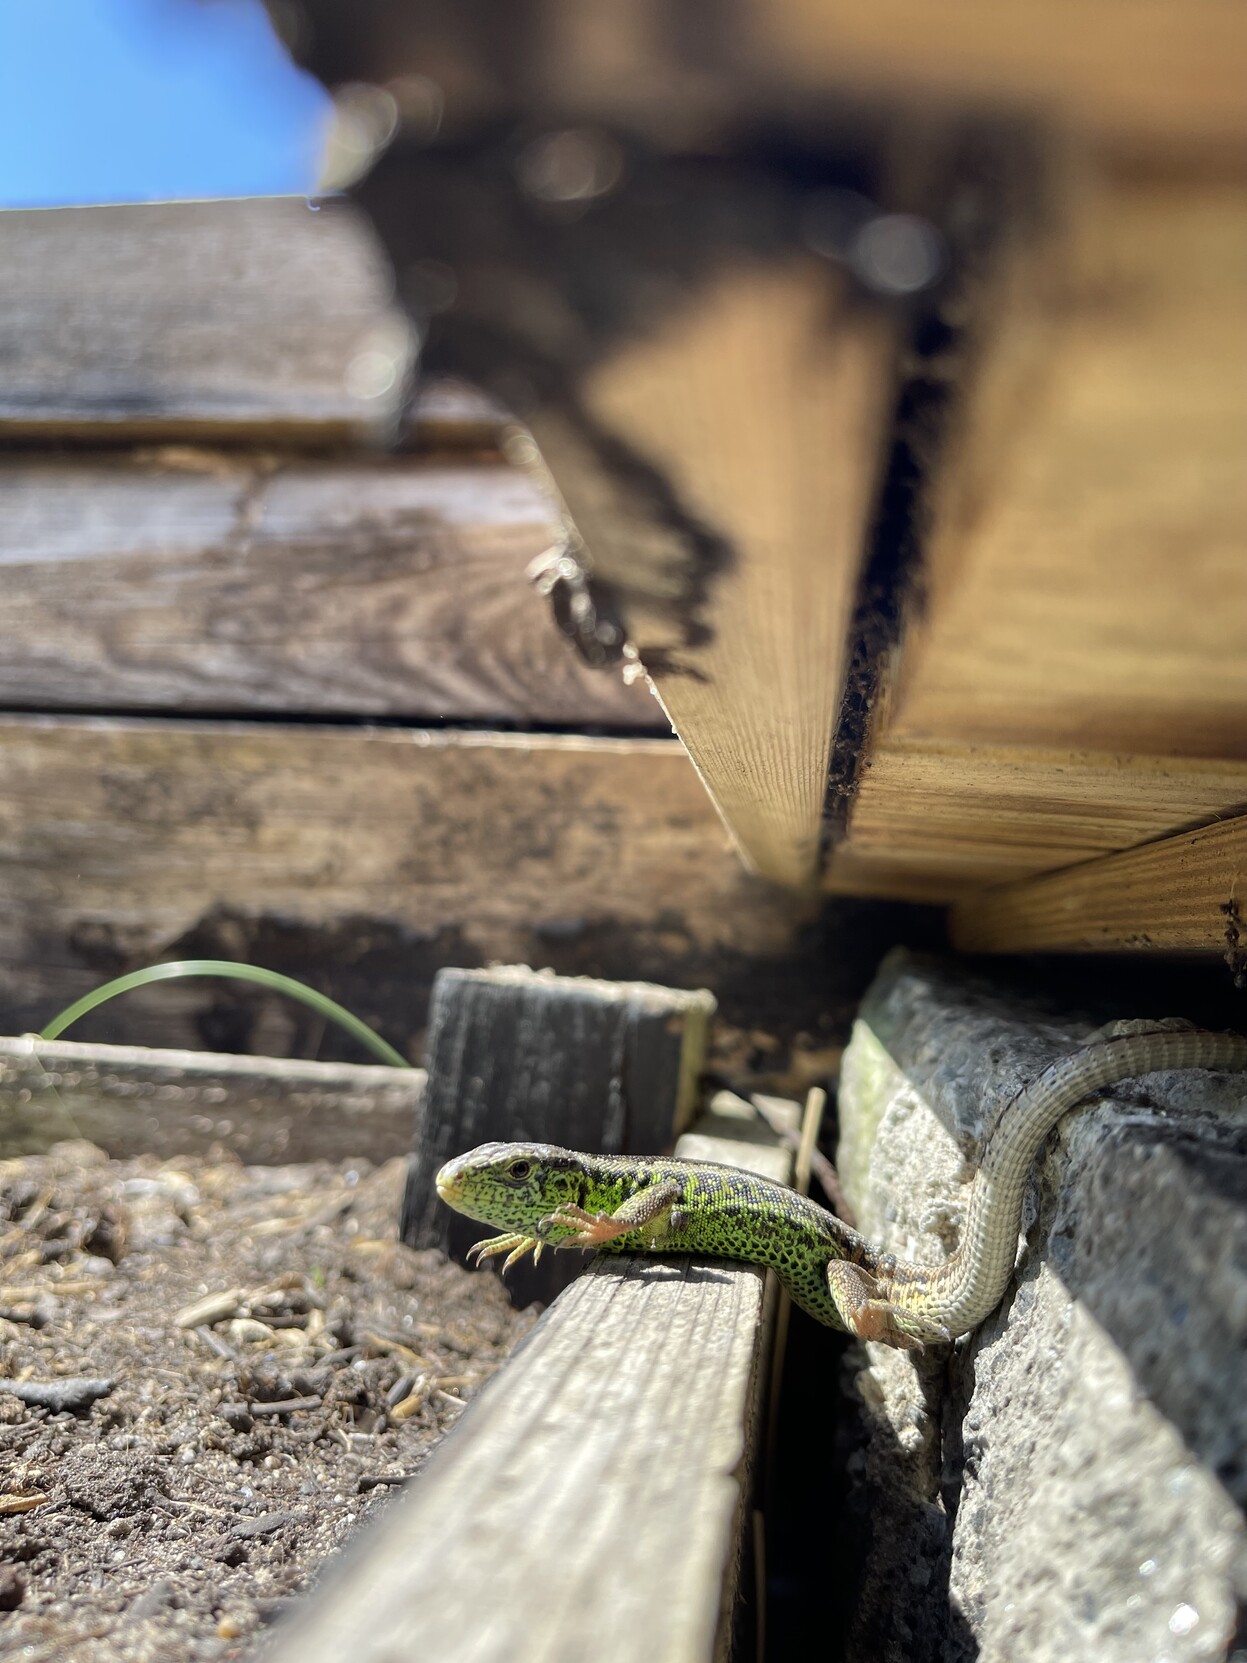 A small lizard lying under what looks like a roof of wood on a wooden plank. It's the edge of a raised beet